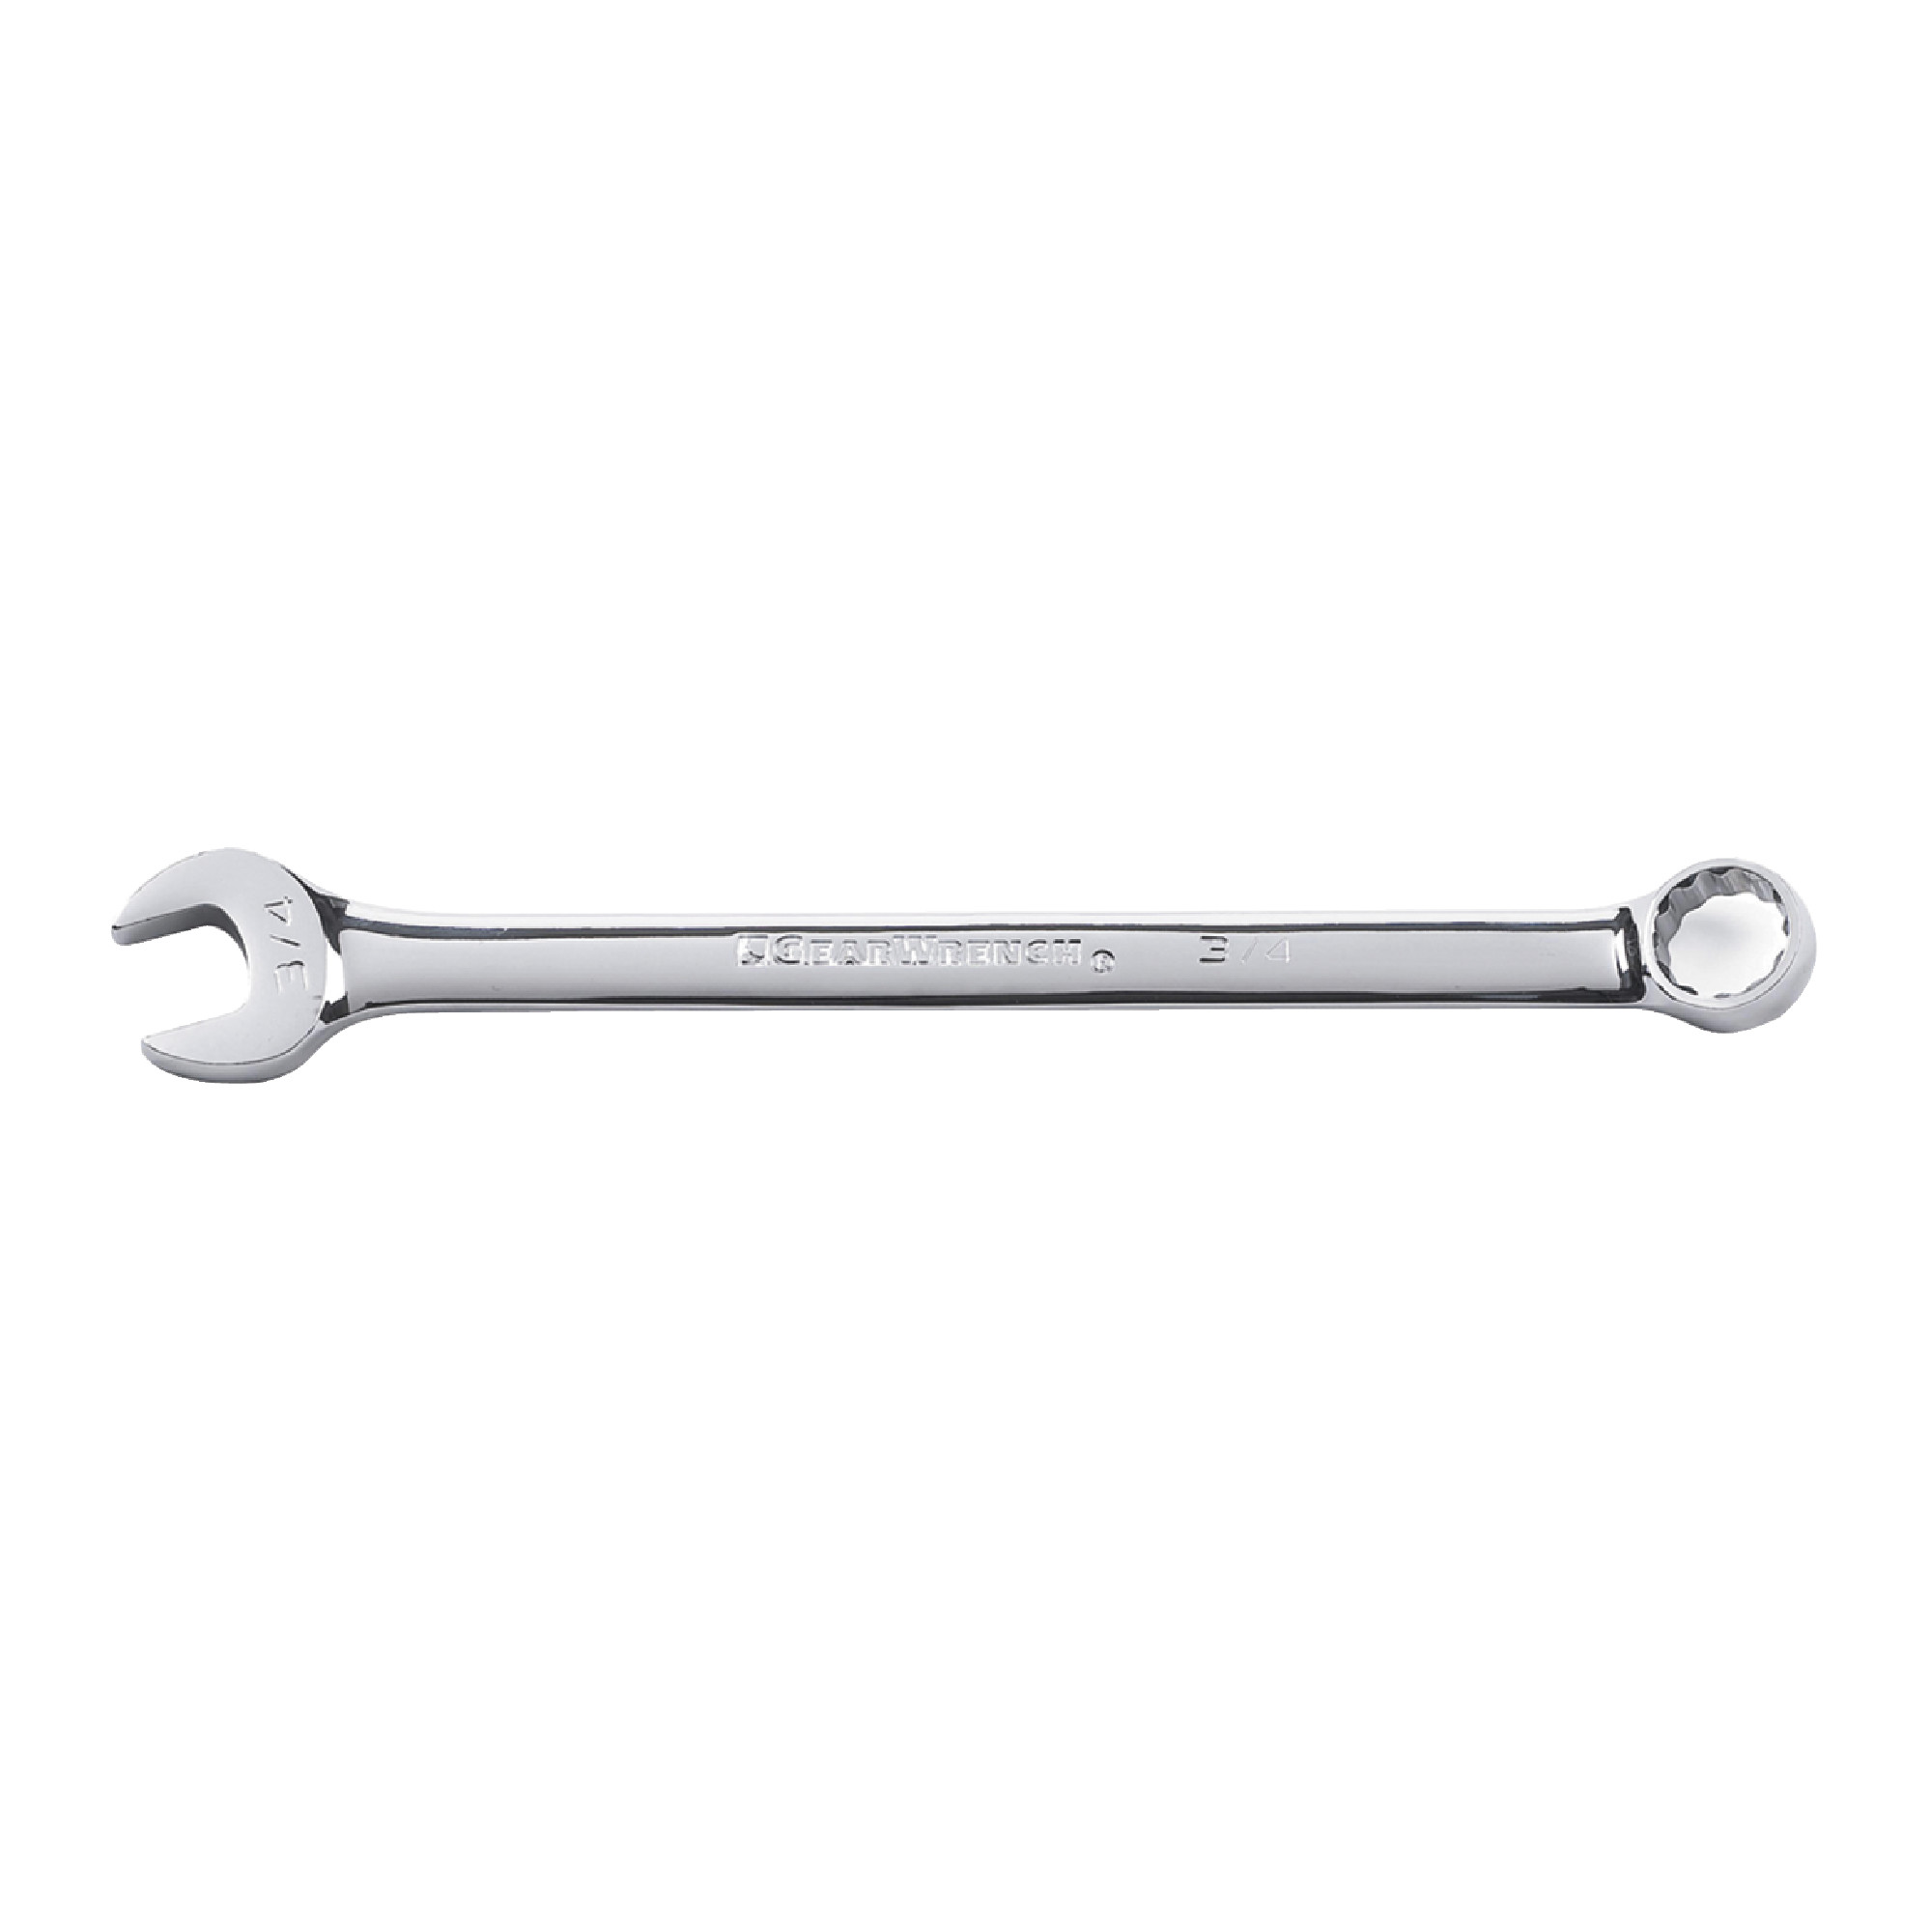 22mm 12 Point Long Pattern Combination Wrench